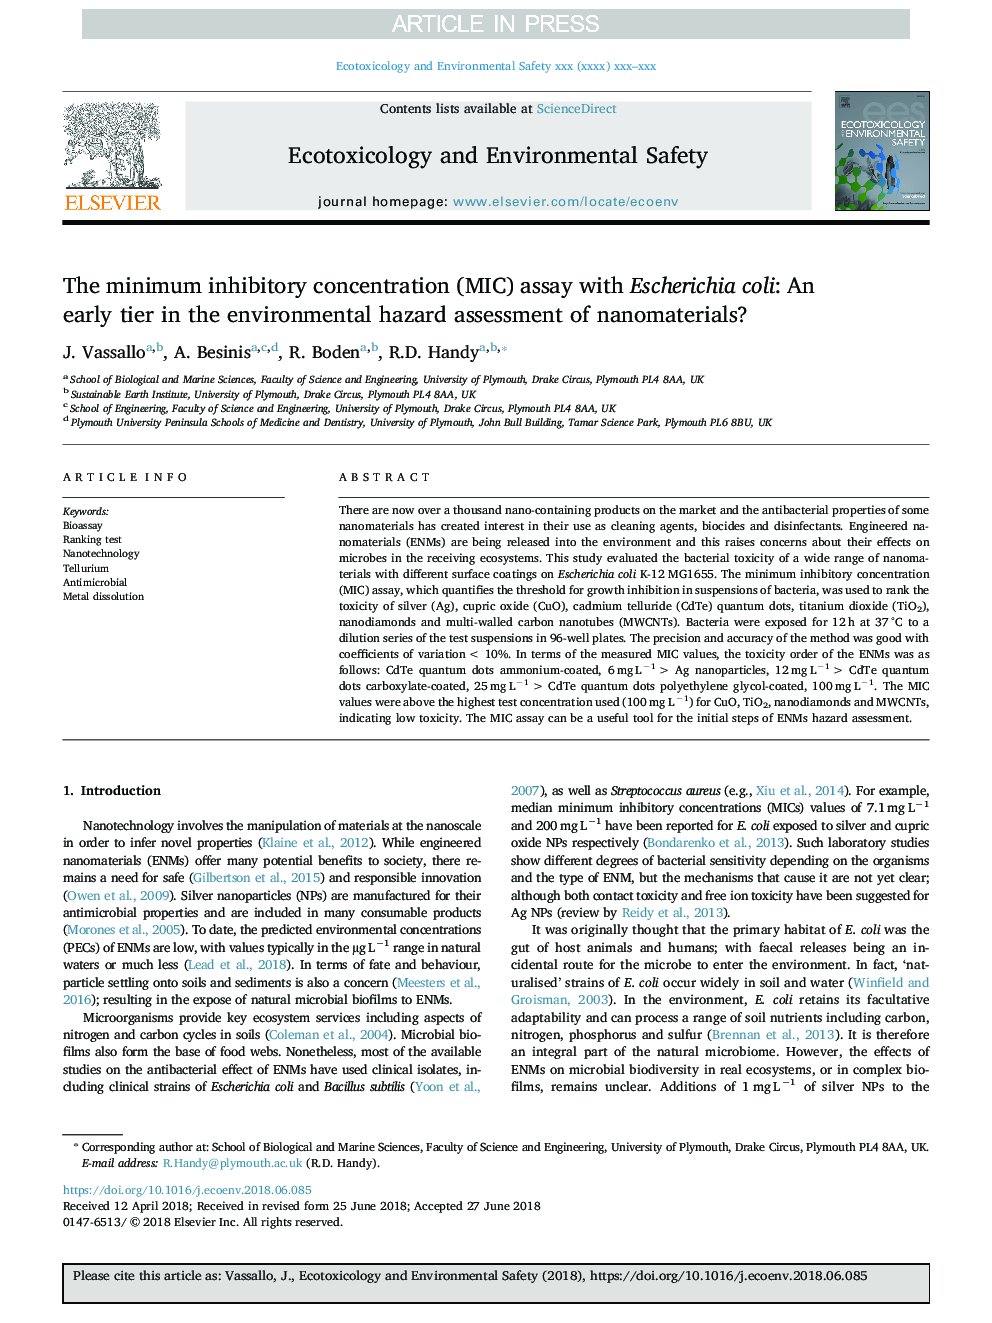 The minimum inhibitory concentration (MIC) assay with Escherichia coli: An early tier in the environmental hazard assessment of nanomaterials?